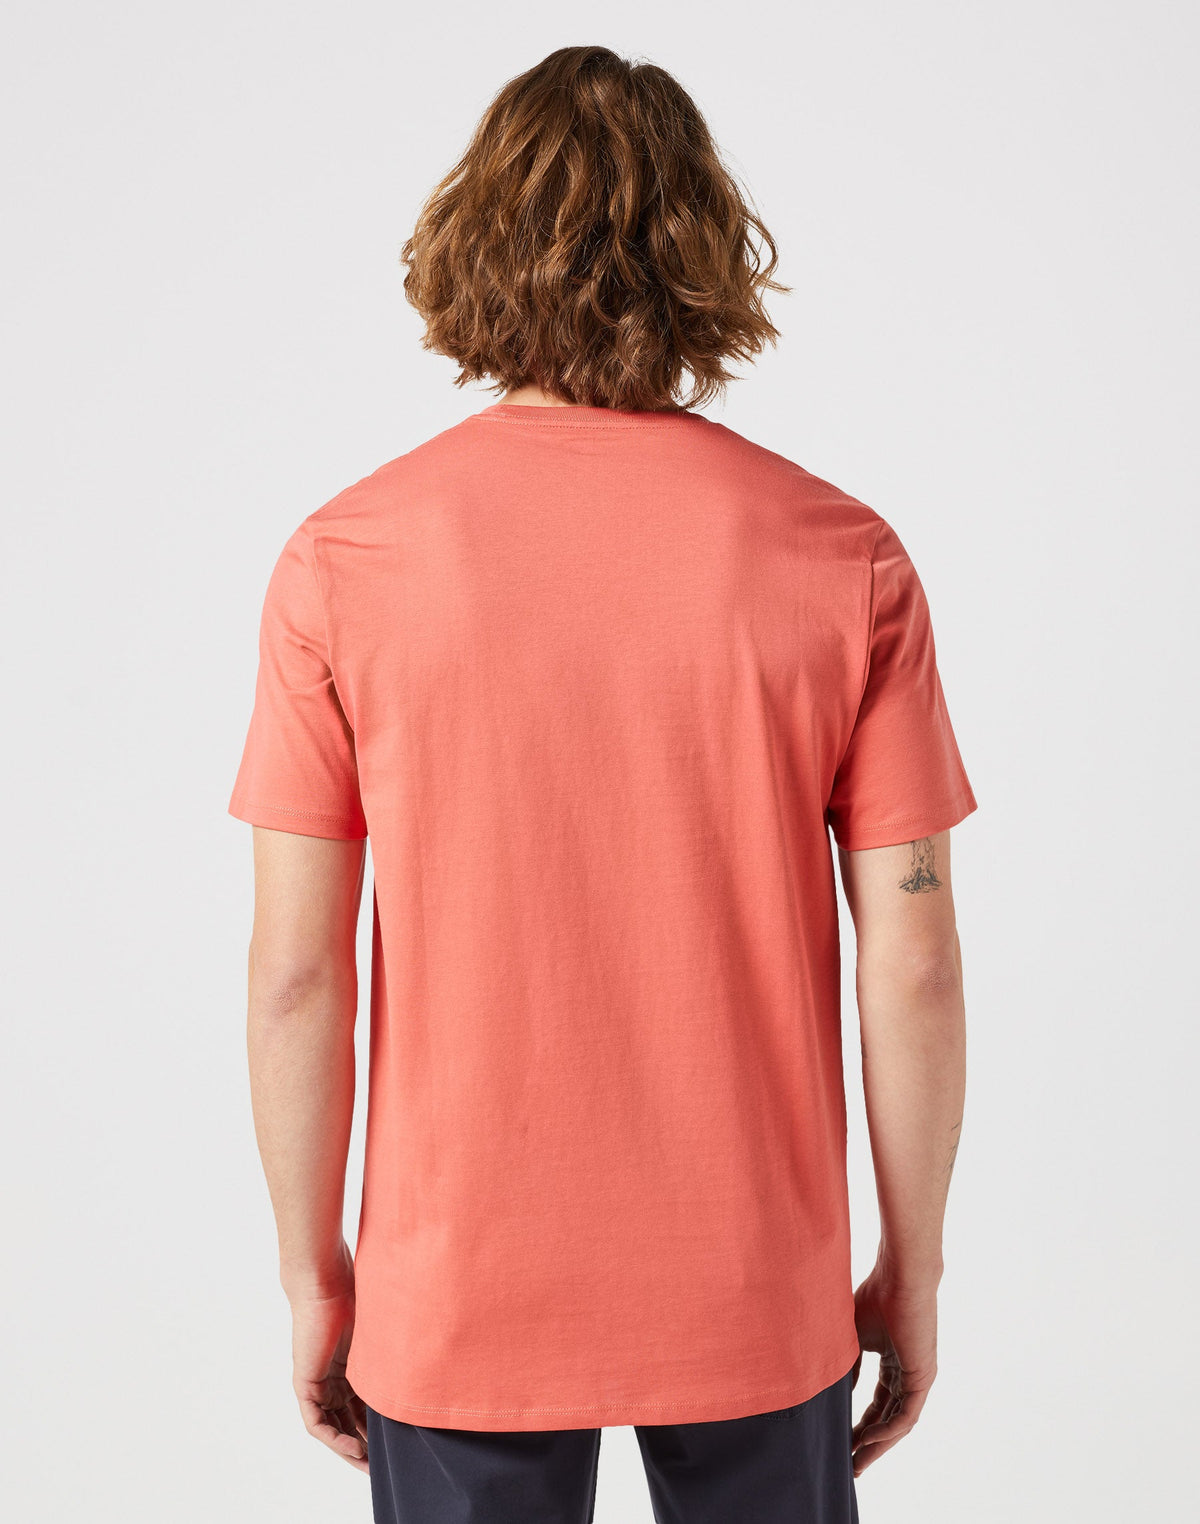 Sign Off Tee in Burnt Sienna